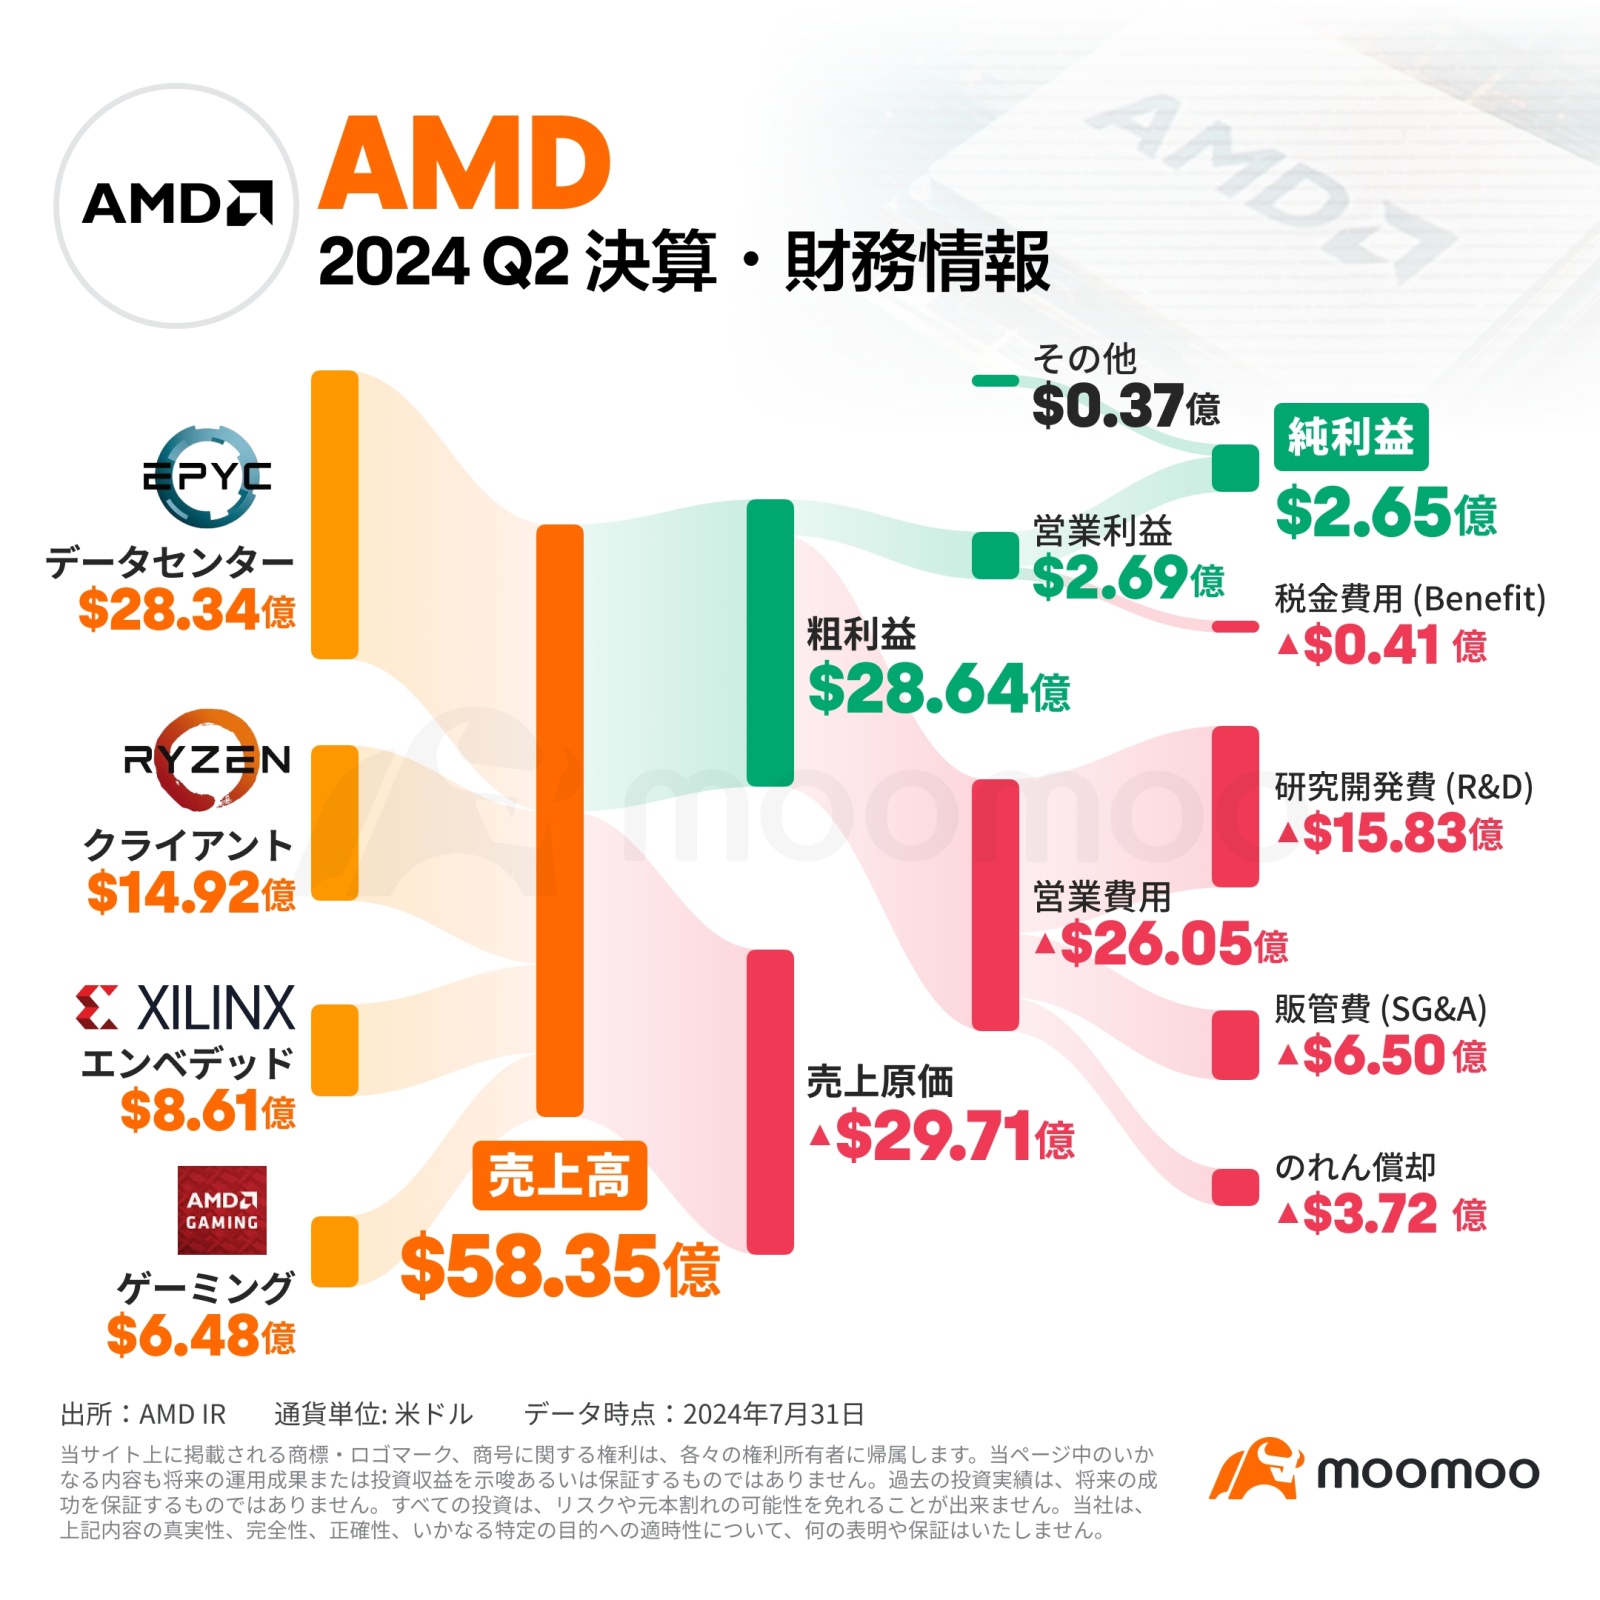 [Financial Summary] AMD starts chasing NVIDIA! Sales of AI semiconductors are at a record high, and forecasts have also been revised upward